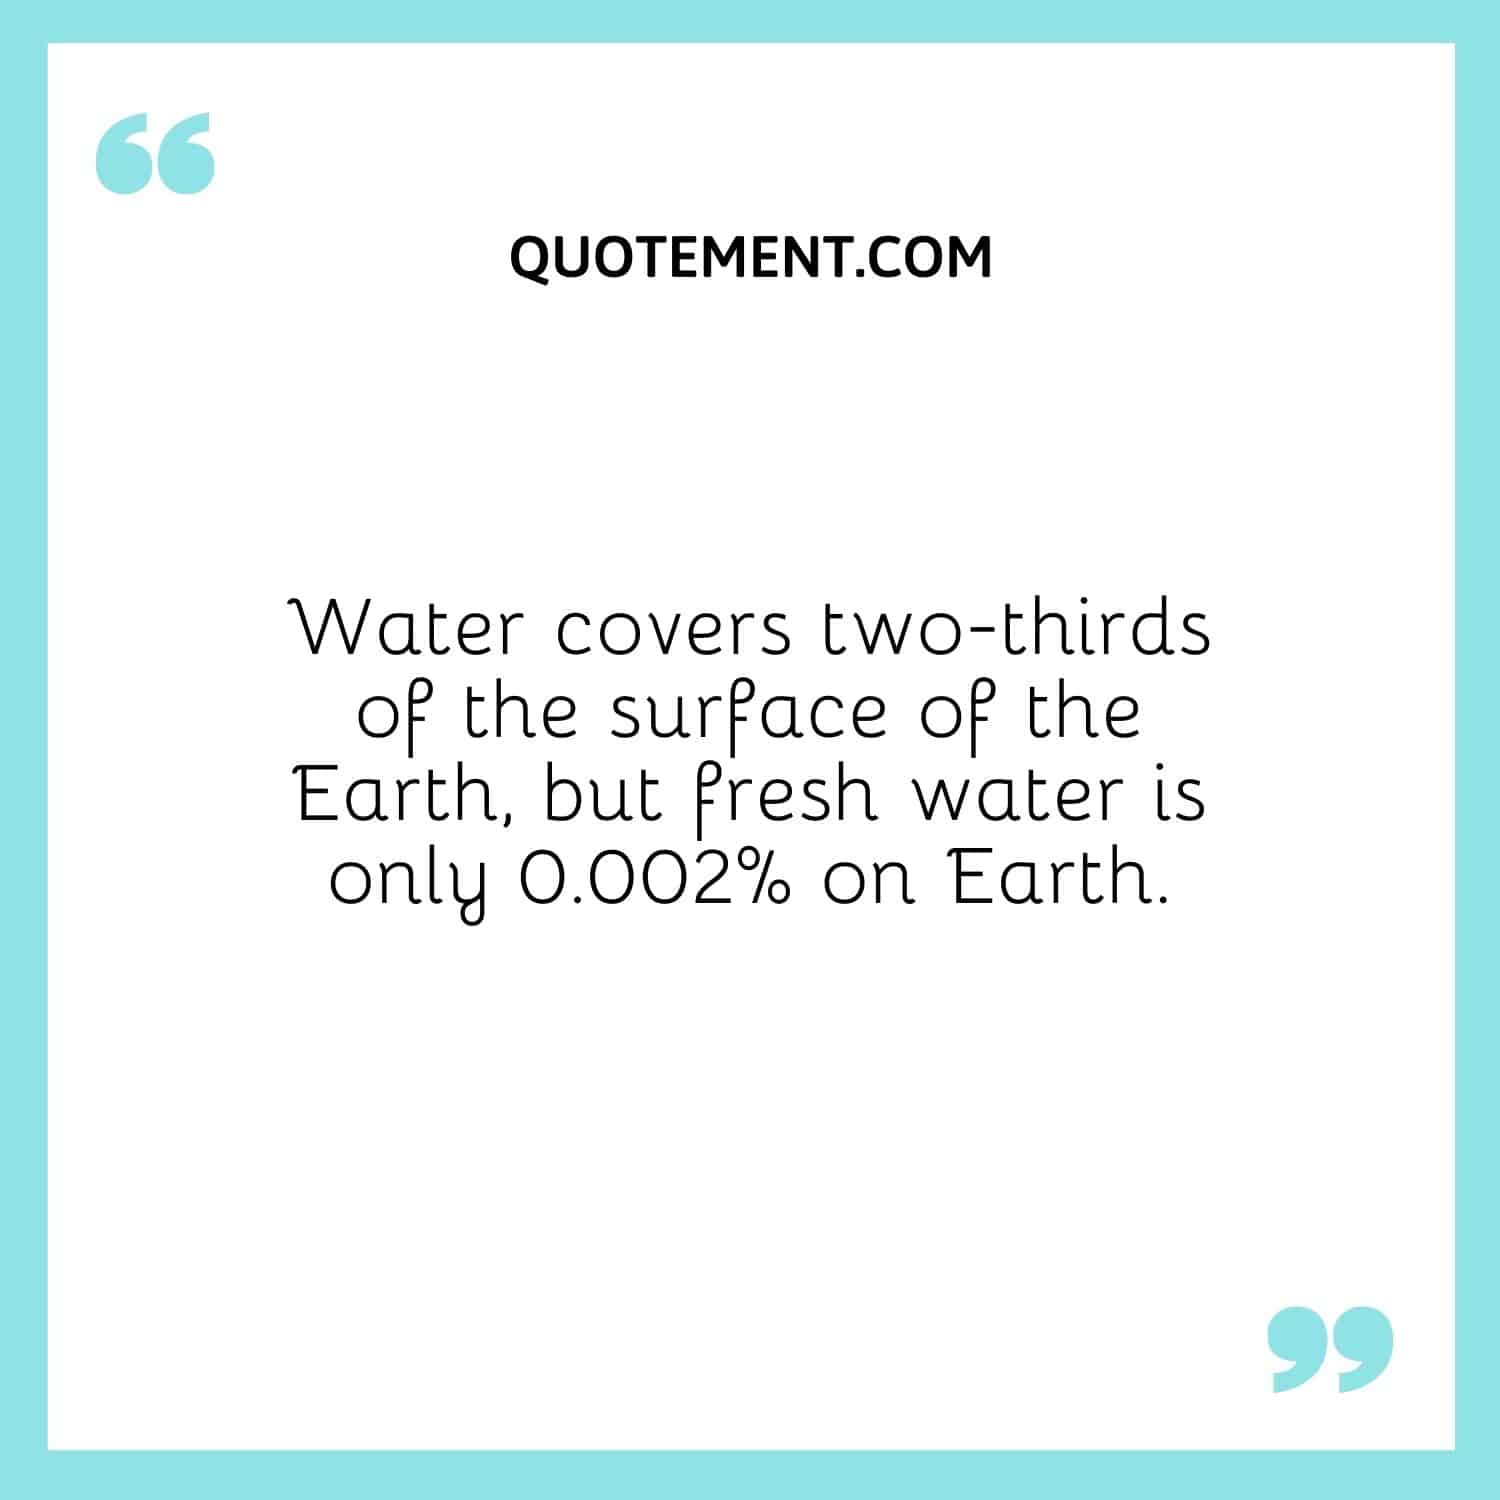 Water covers two-thirds of the surface of the Earth